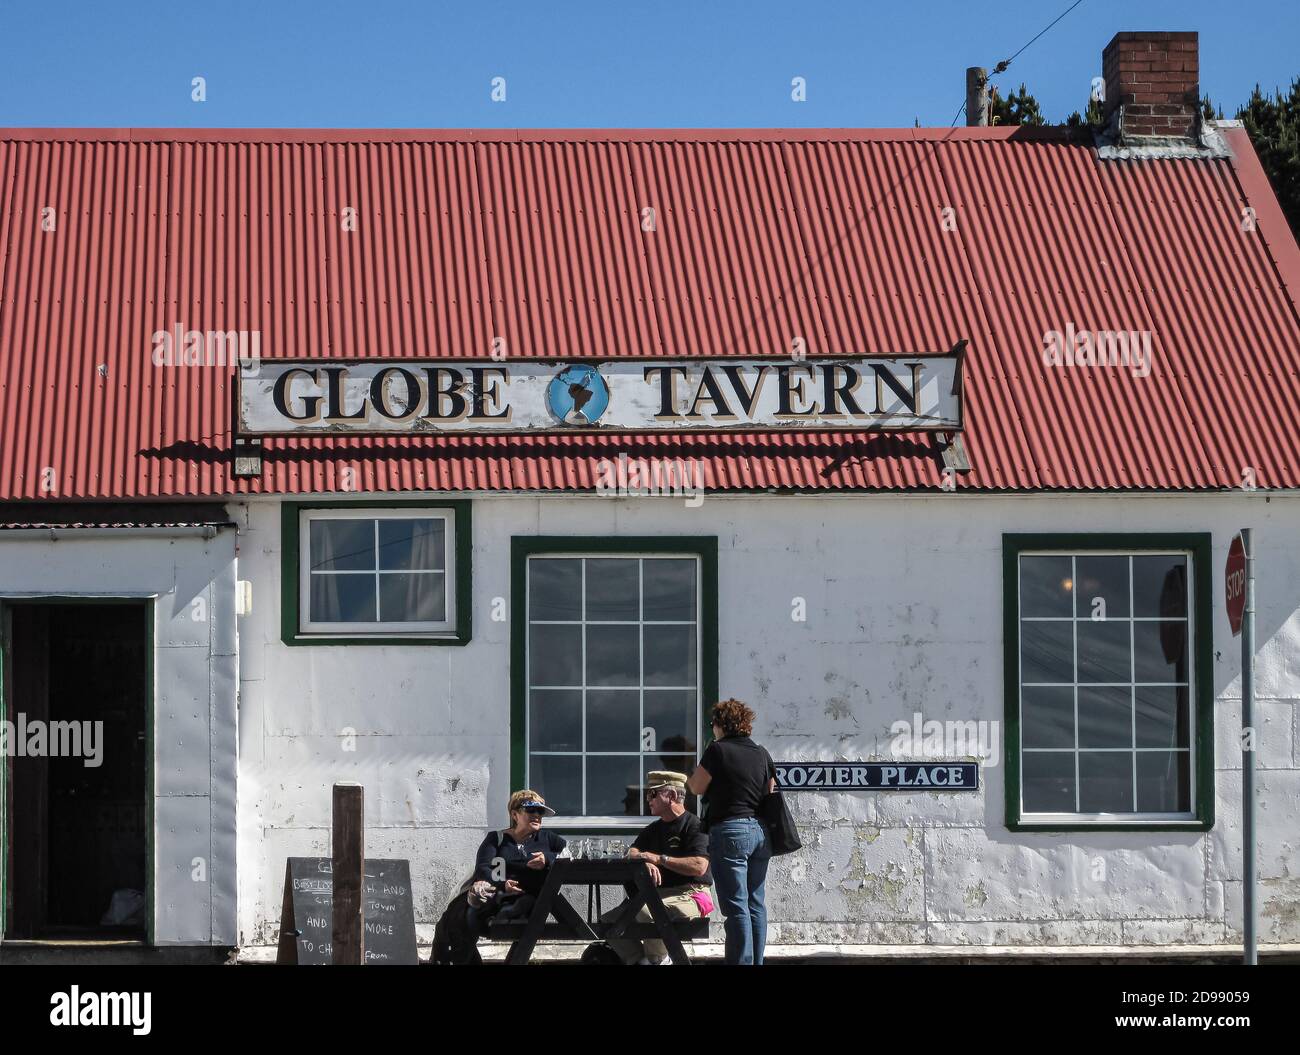 Stanley, Falkland Islands, UK - December 15, 2008: Closeup of entrance to Globe Tavern as white building with red roof under full blue sky with people Stock Photo